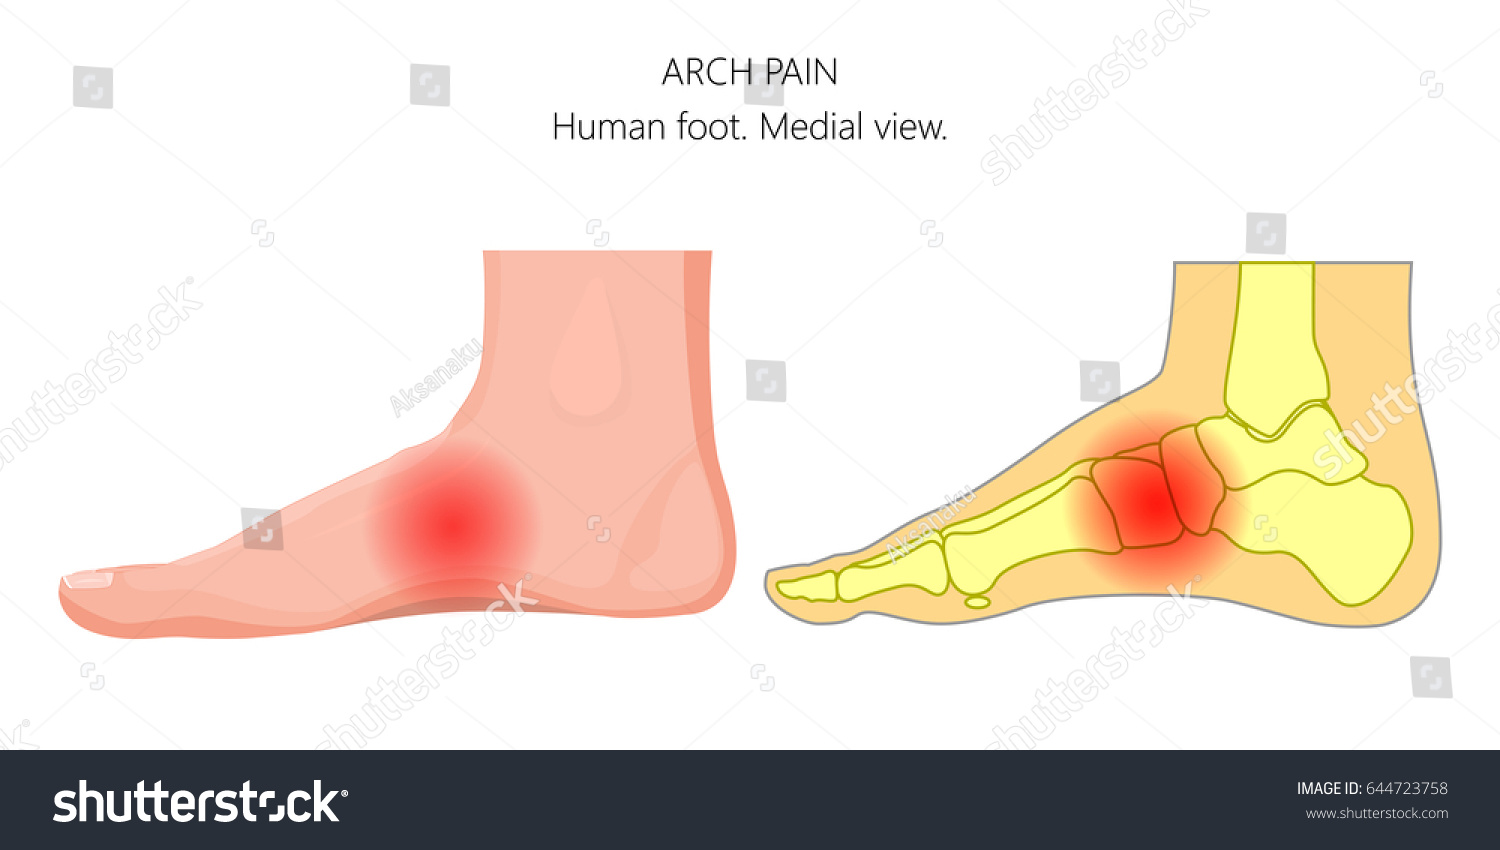 foot medial arch pain